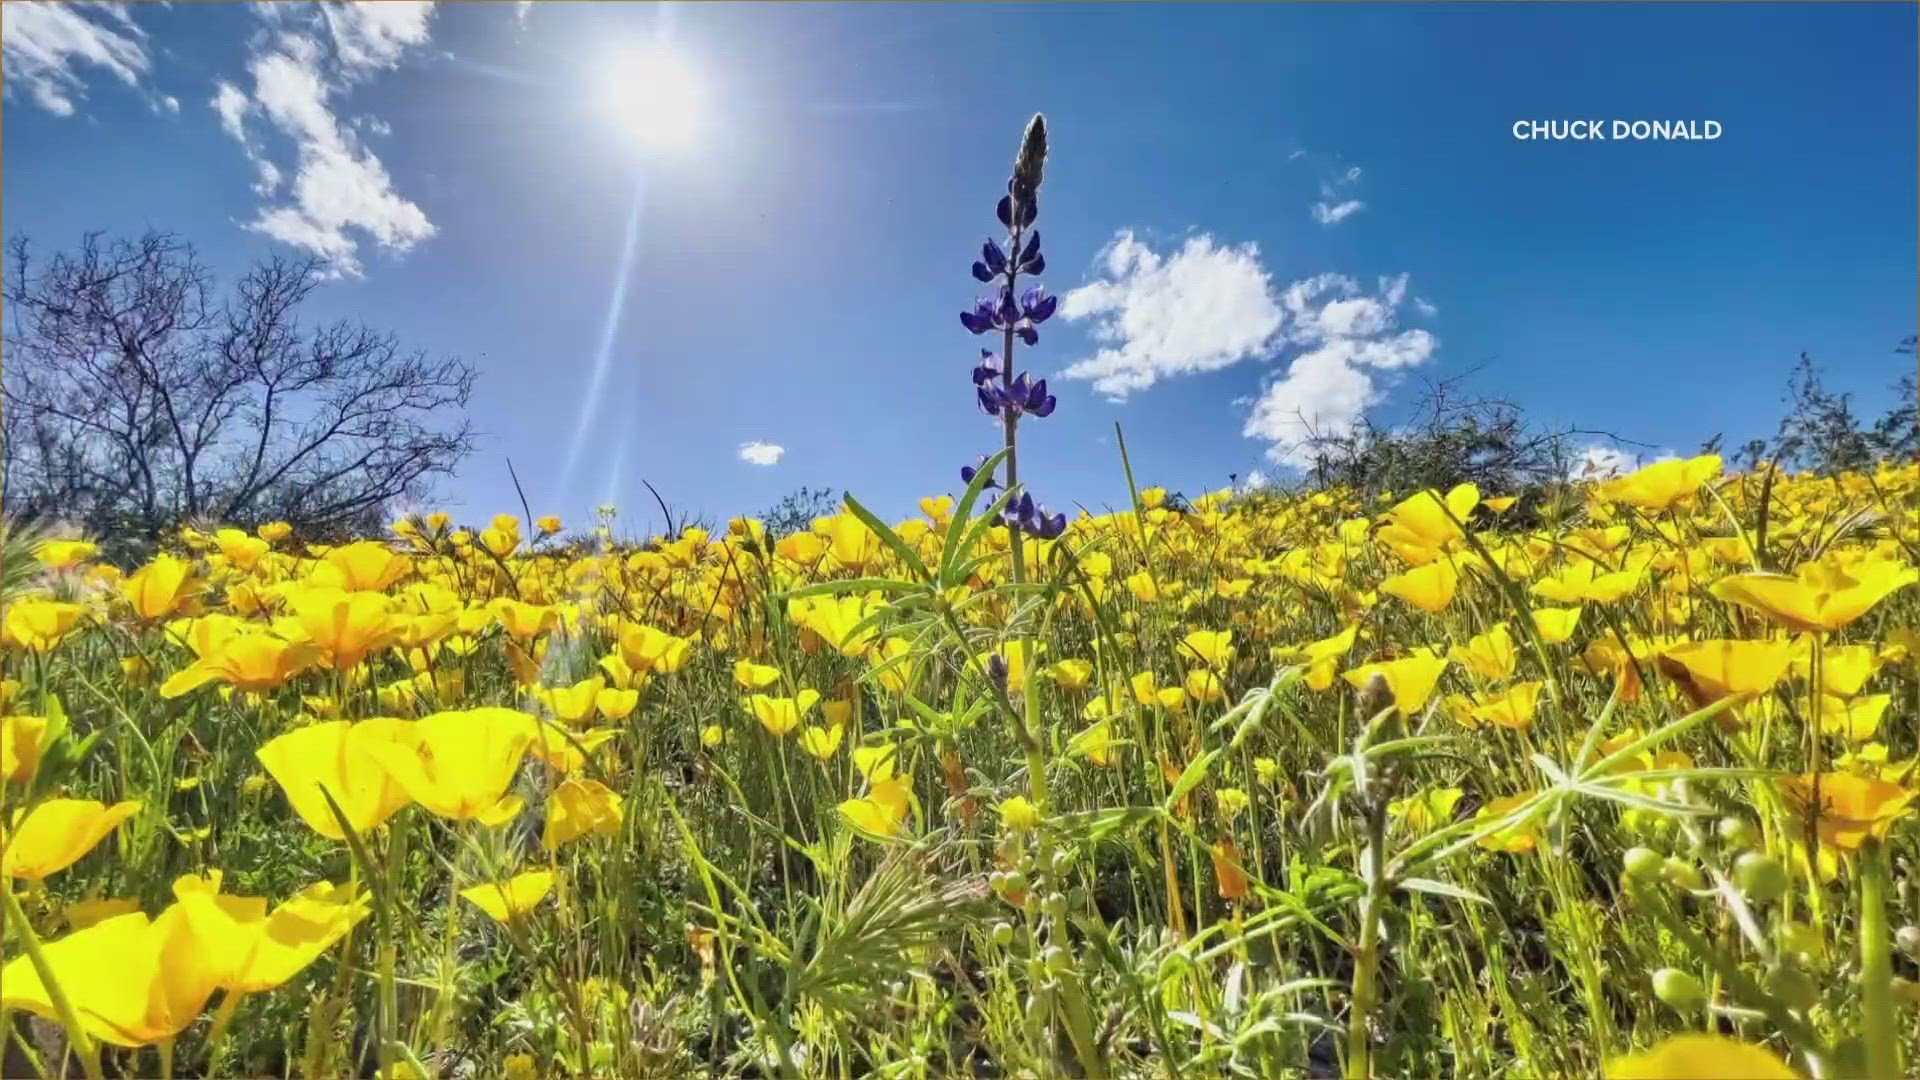 Last year was a superbloom. While this year won't be as spectacular, it's still well above average.